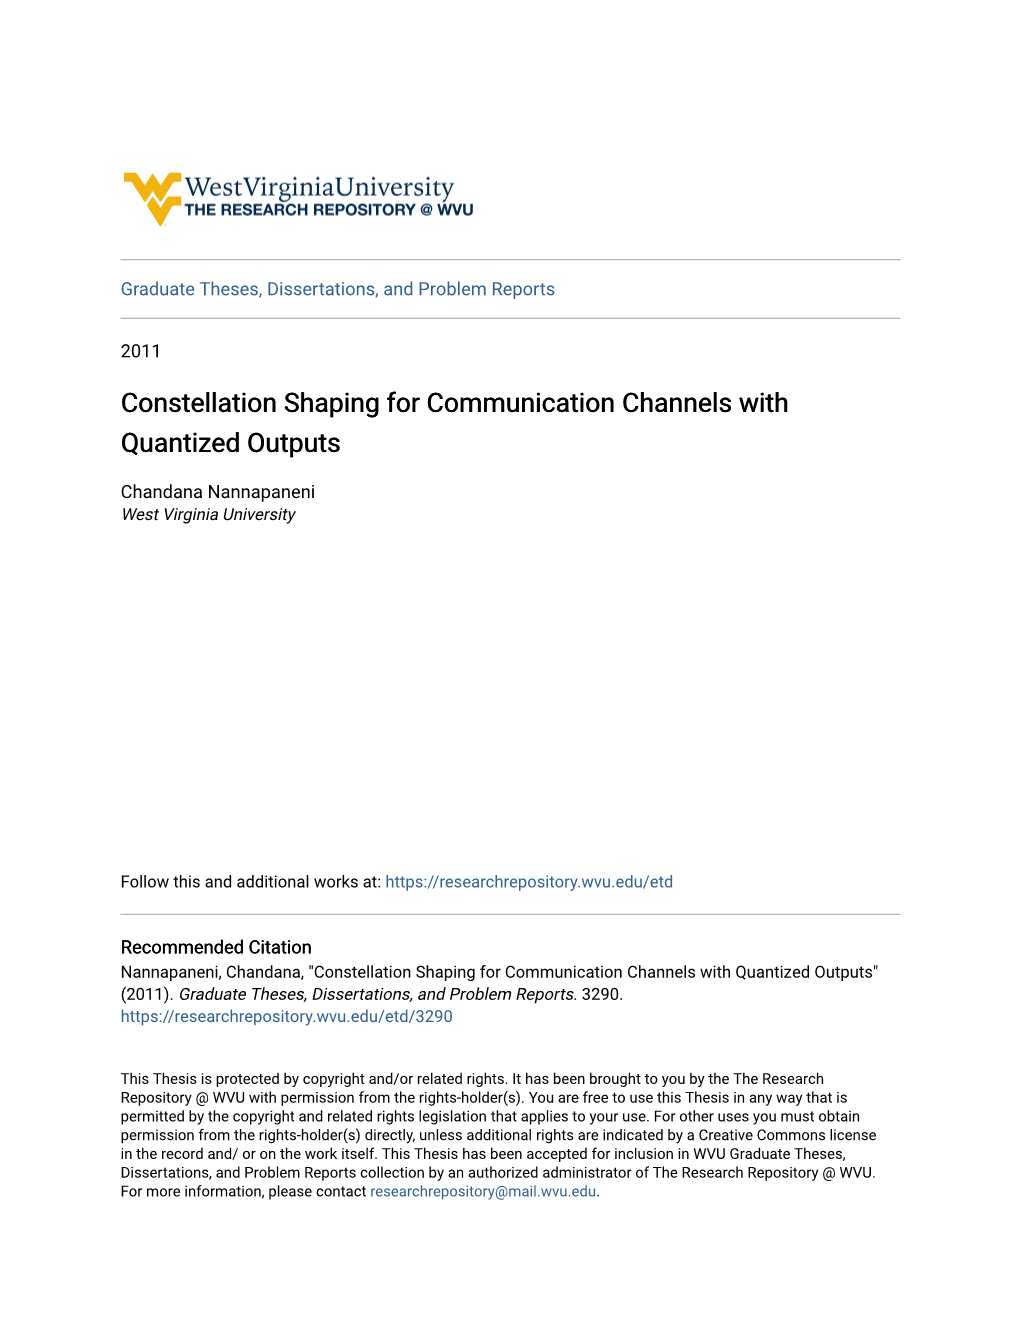 Constellation Shaping for Communication Channels with Quantized Outputs